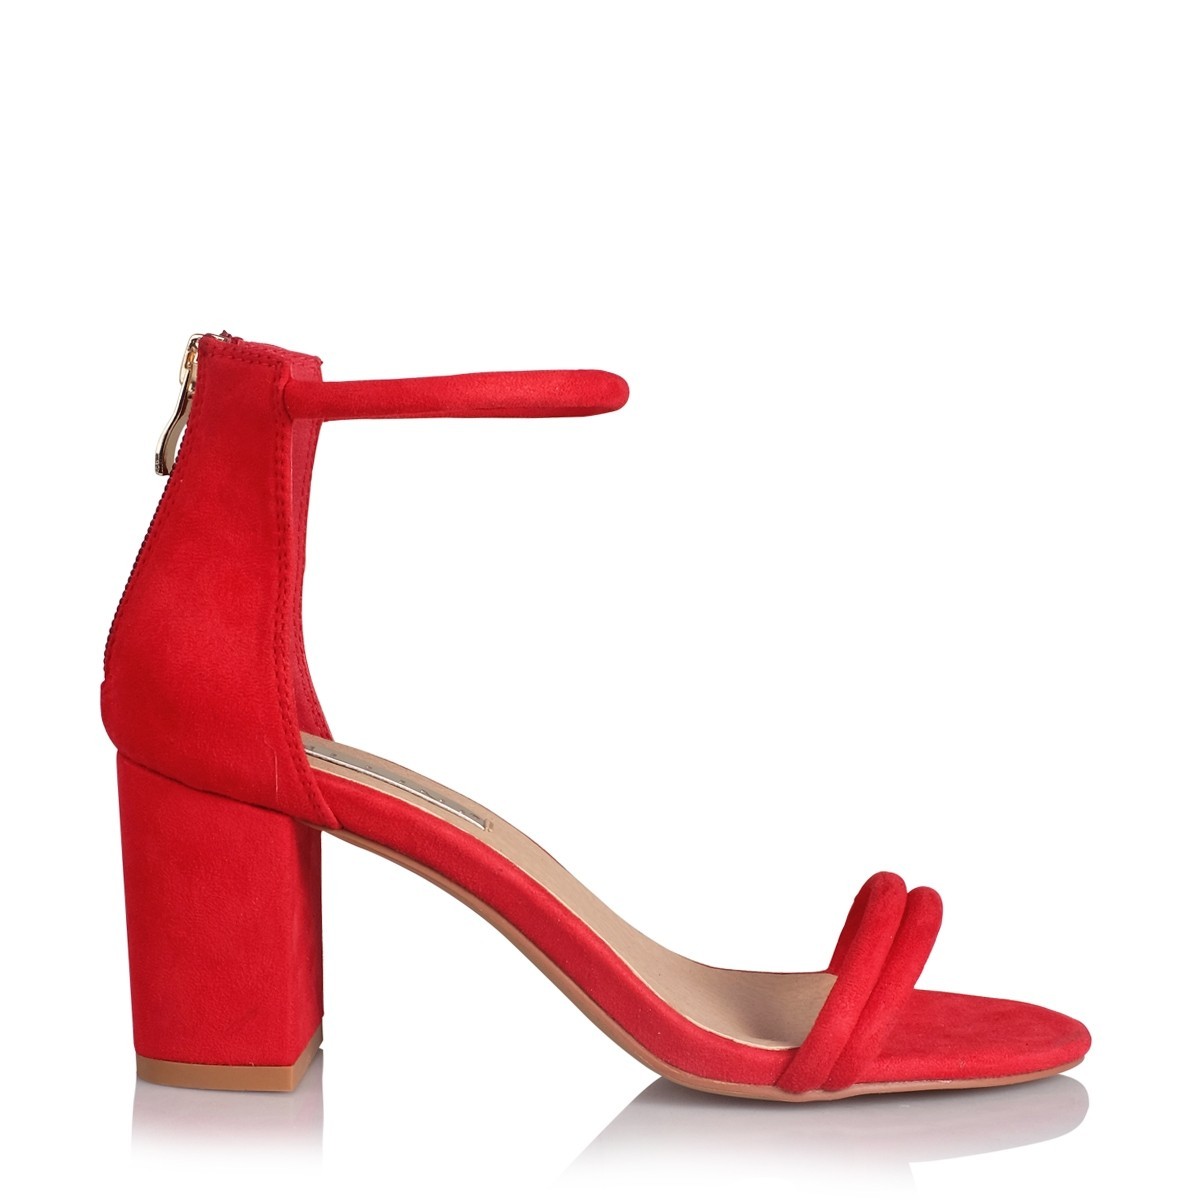 Fiji Red Suede by Billini Shoes on Sale | ShoeSales